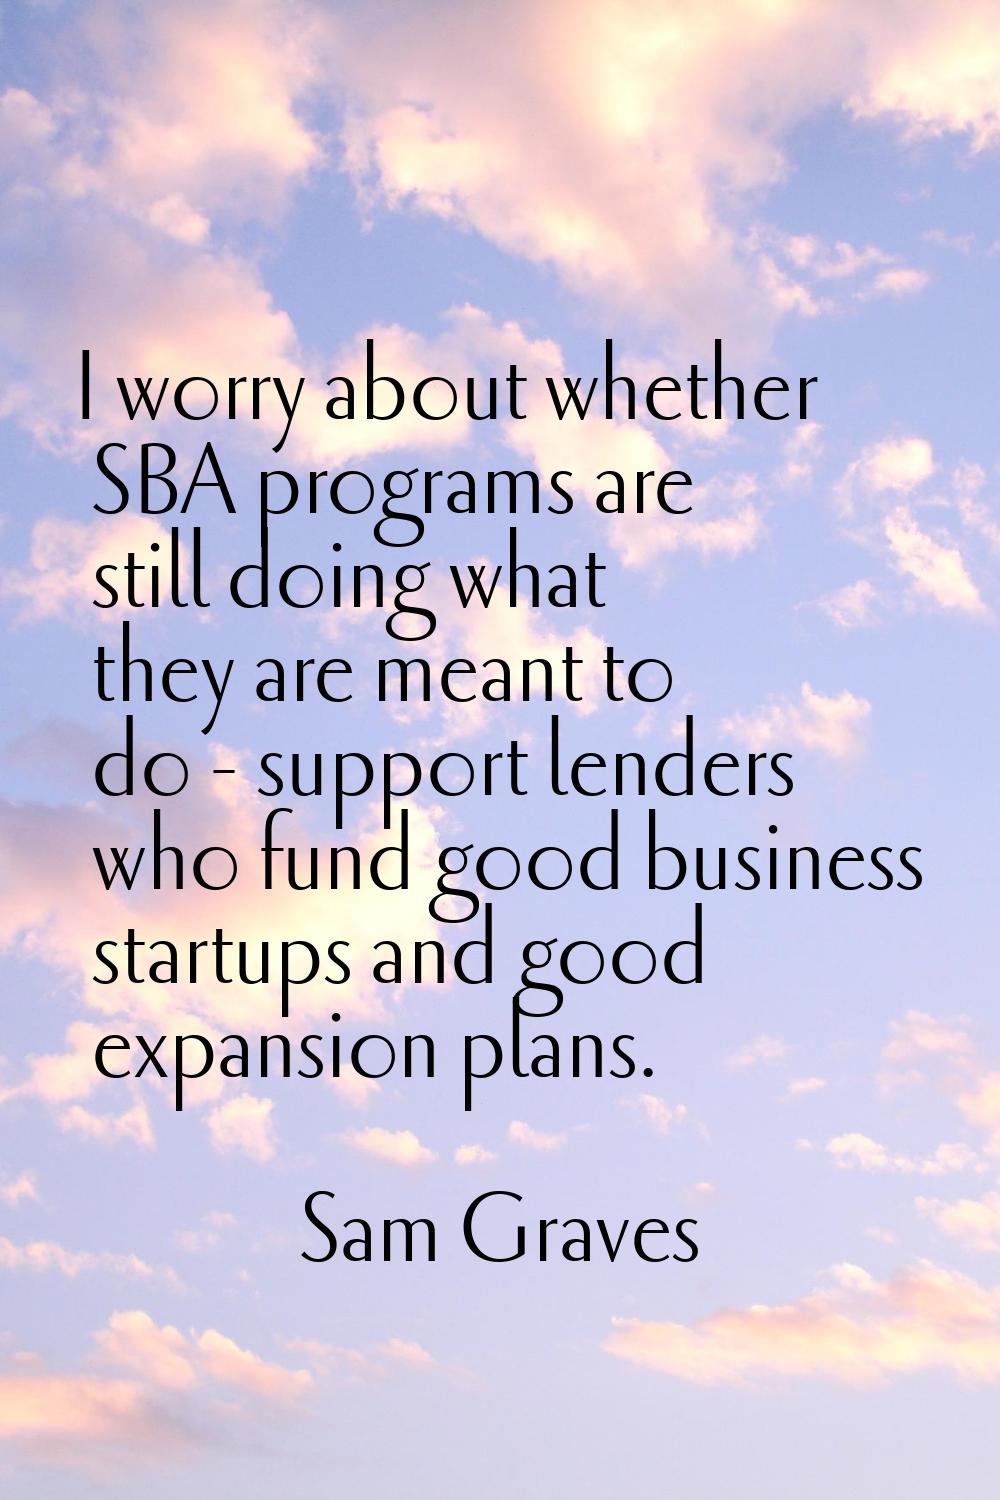 I worry about whether SBA programs are still doing what they are meant to do - support lenders who 